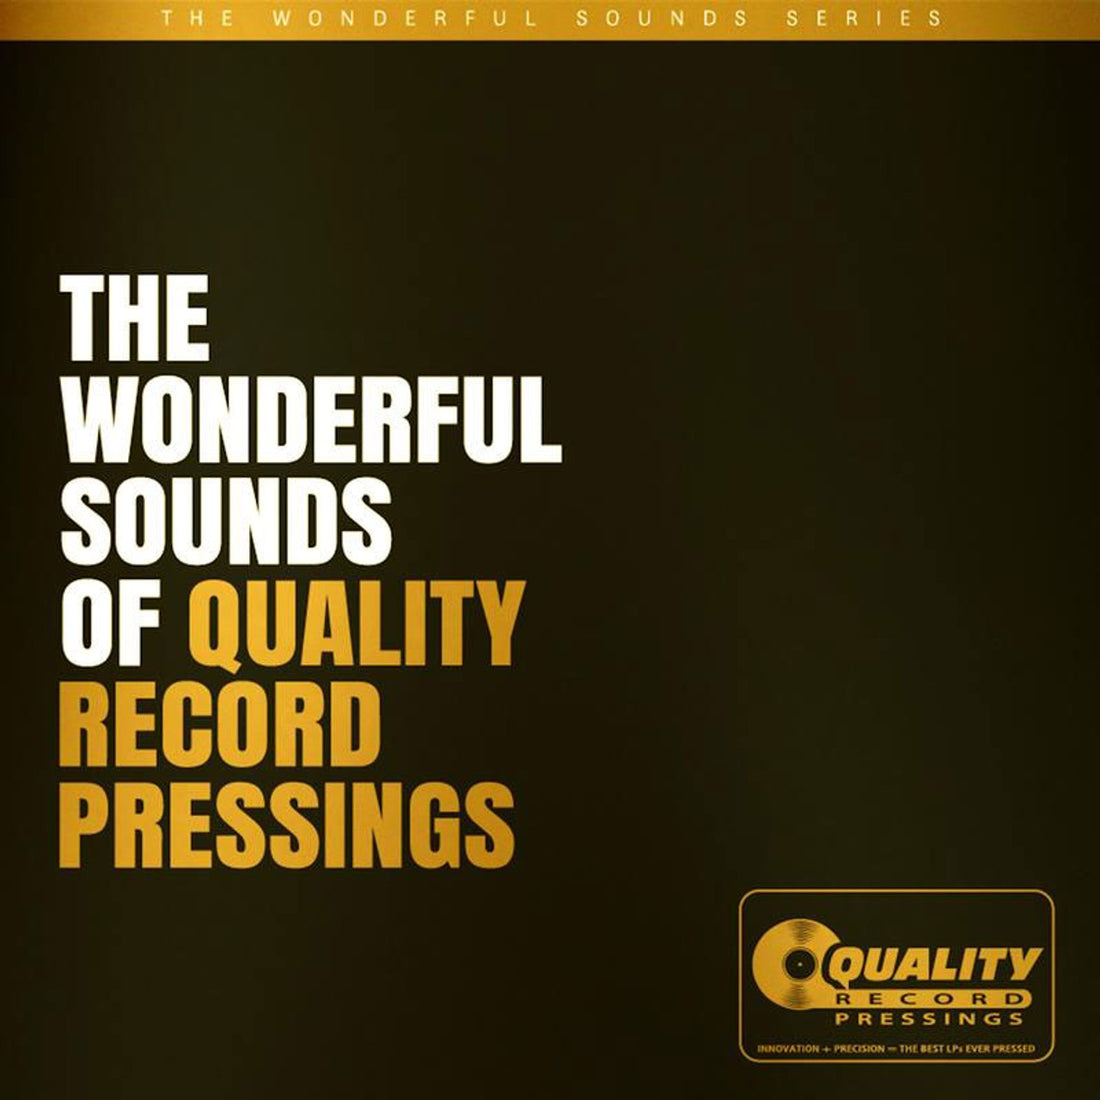 The Wonderful Sounds of Quality Record Pressings [SACD]